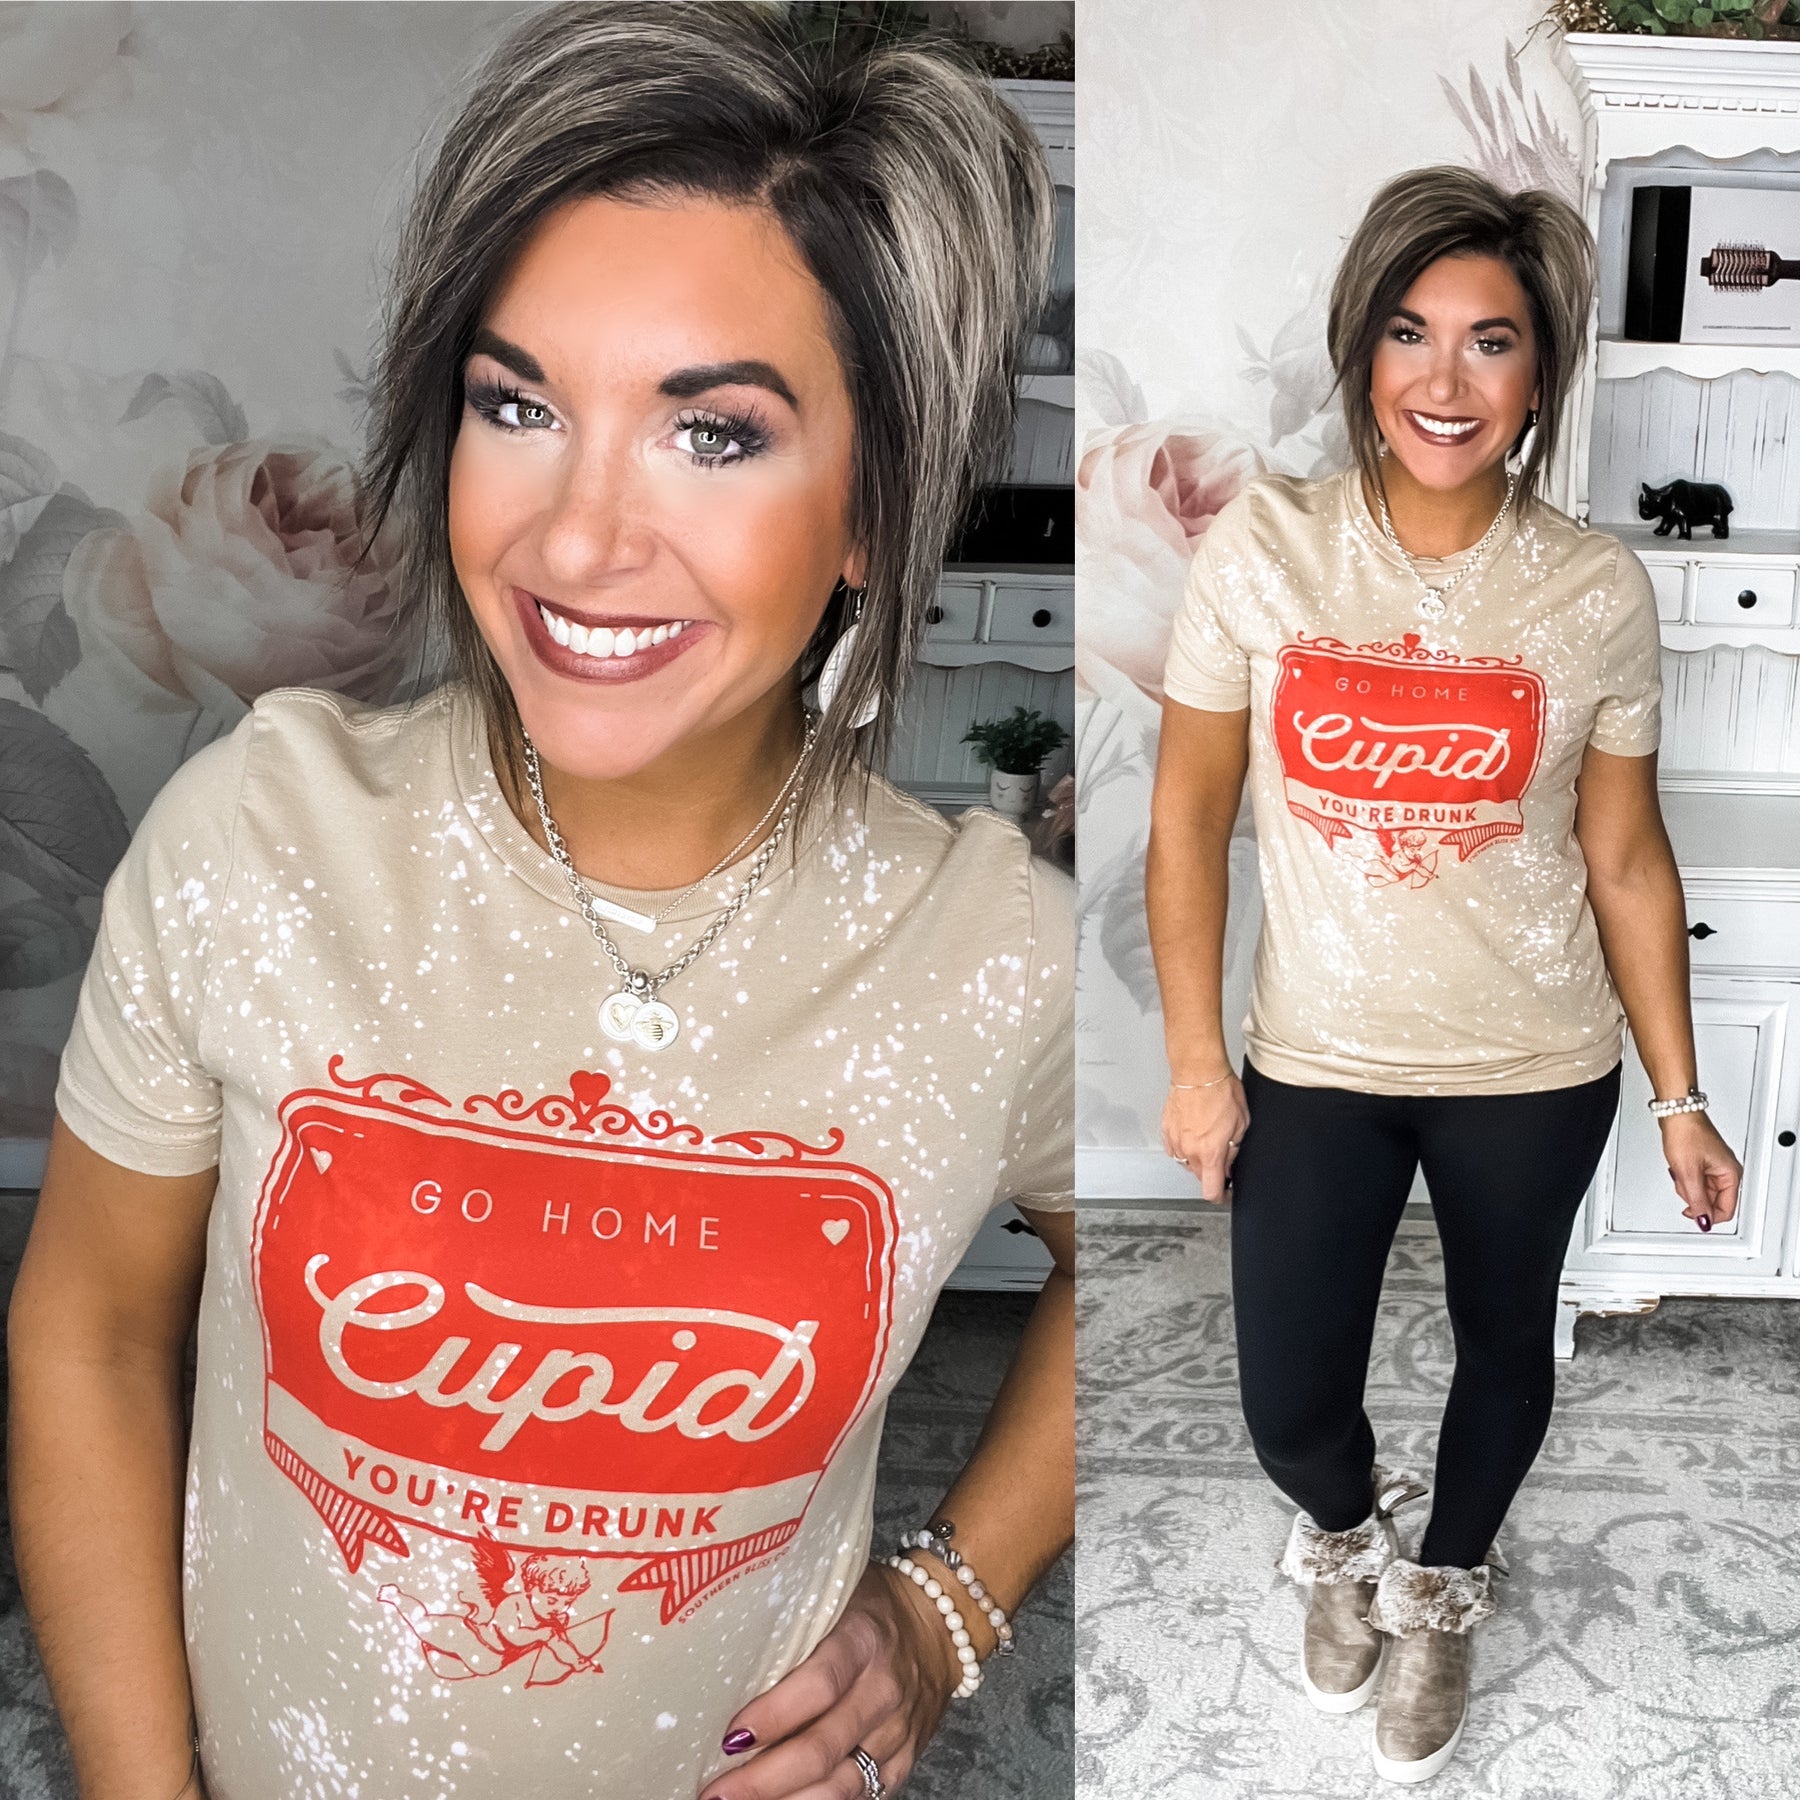 Go Home Cupid Graphic Tee